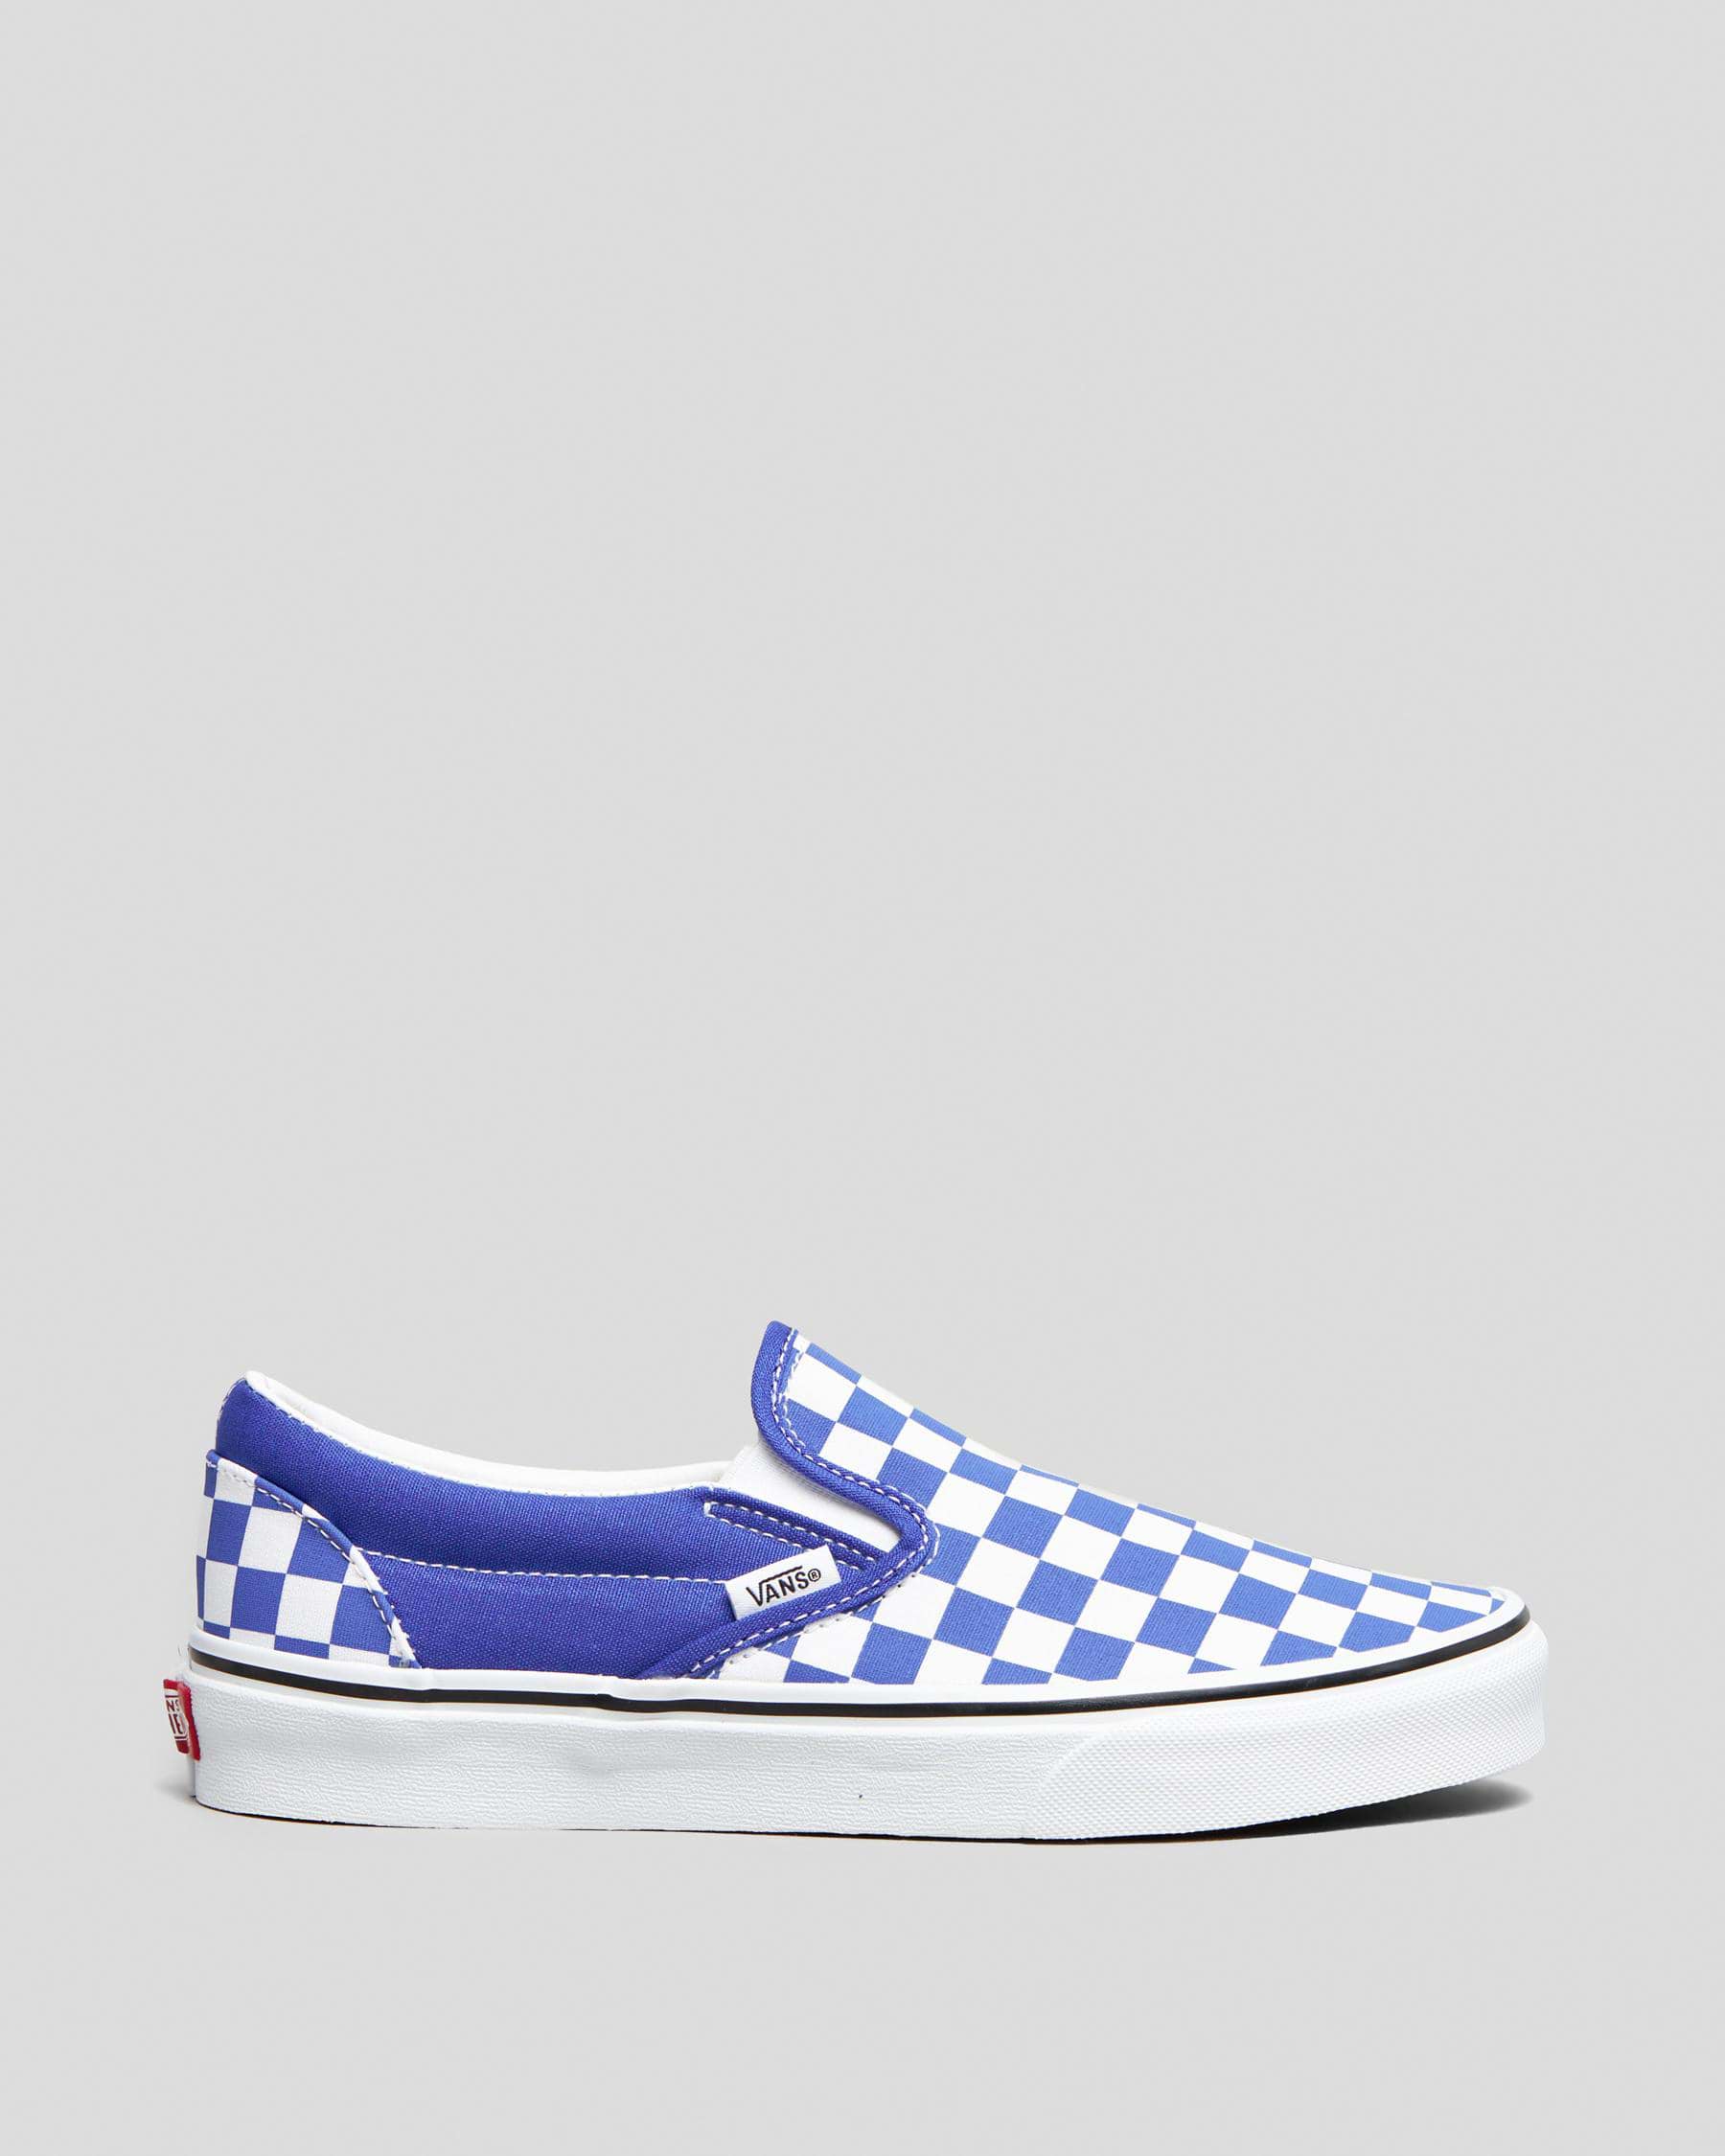 Vans Womens Classic Slip On Shoes In Dazzling Blue - Fast Shipping ...